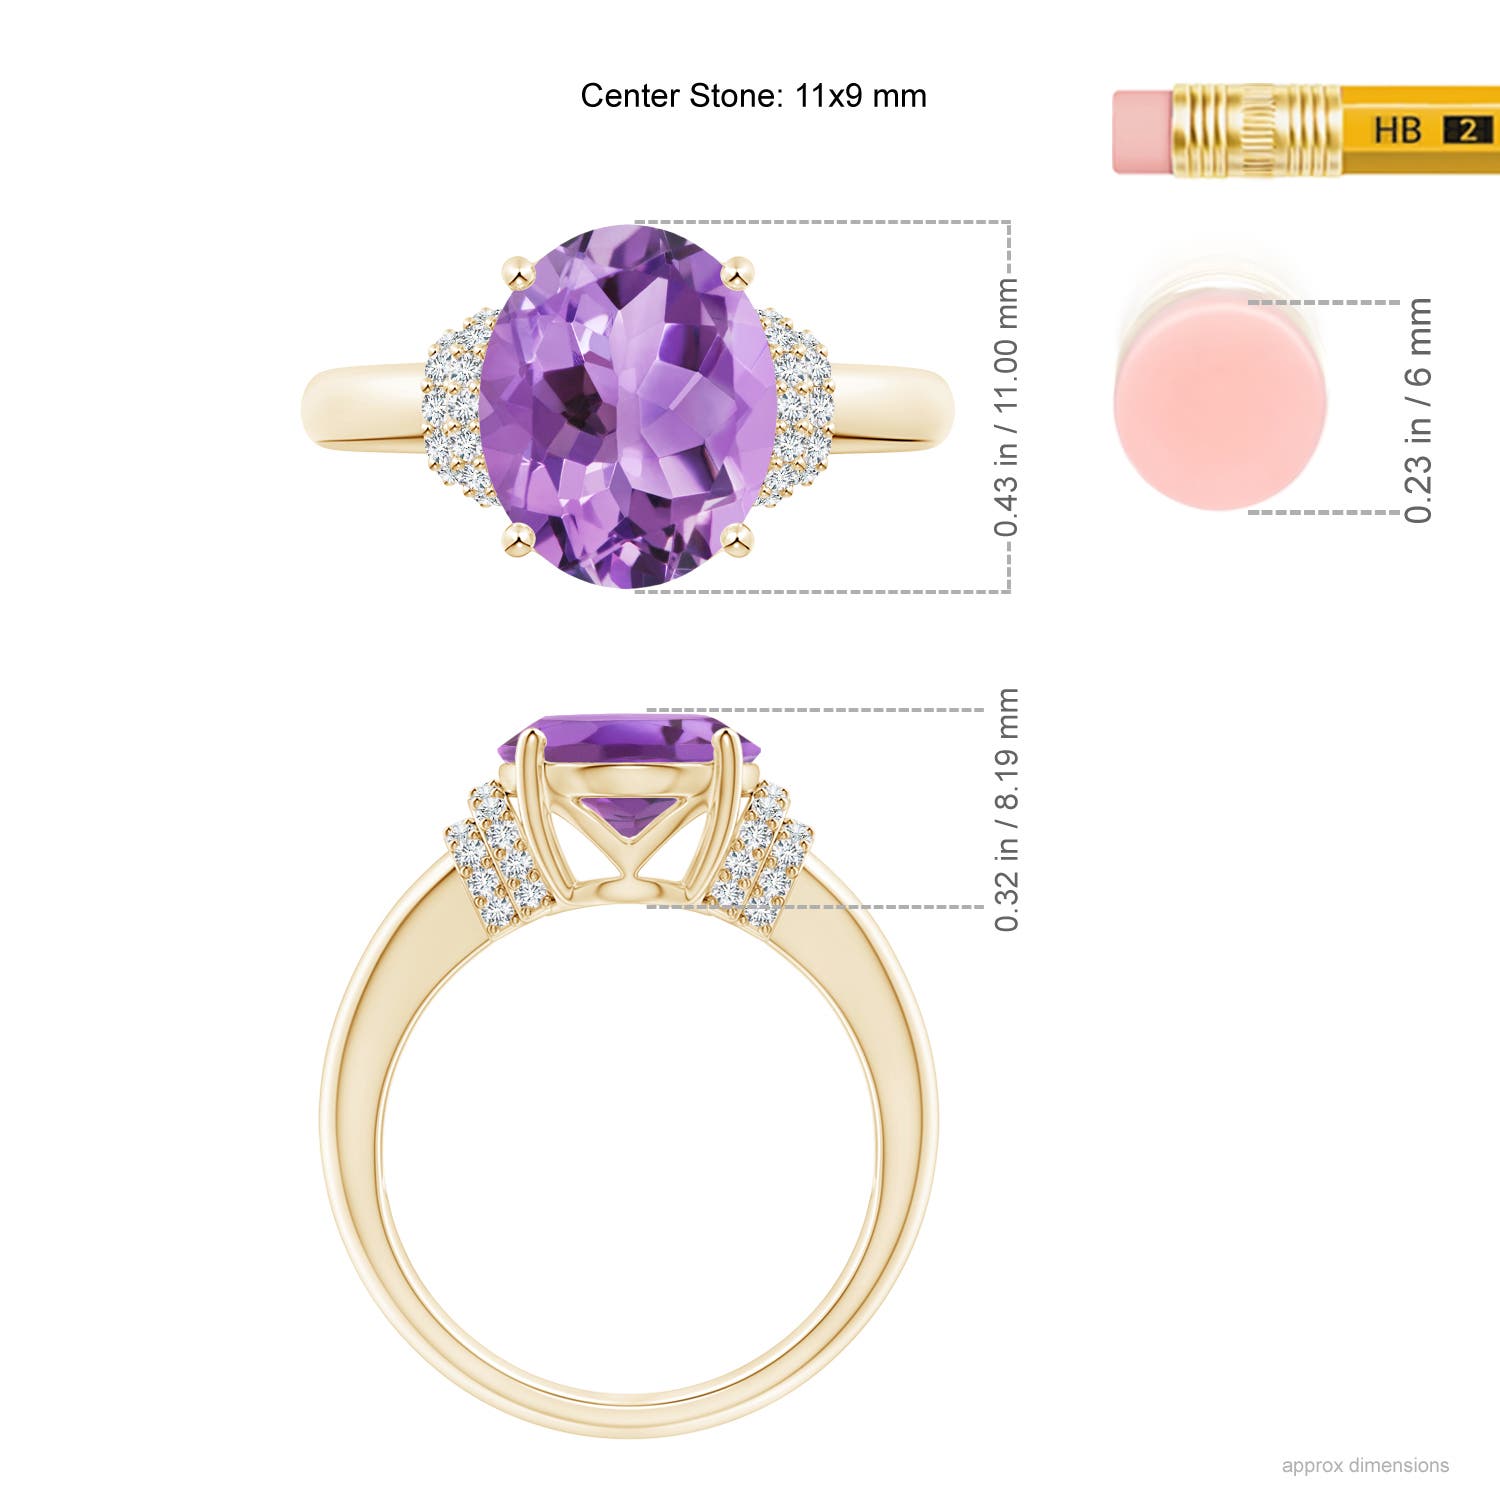 A - Amethyst / 3.35 CT / 14 KT Yellow Gold